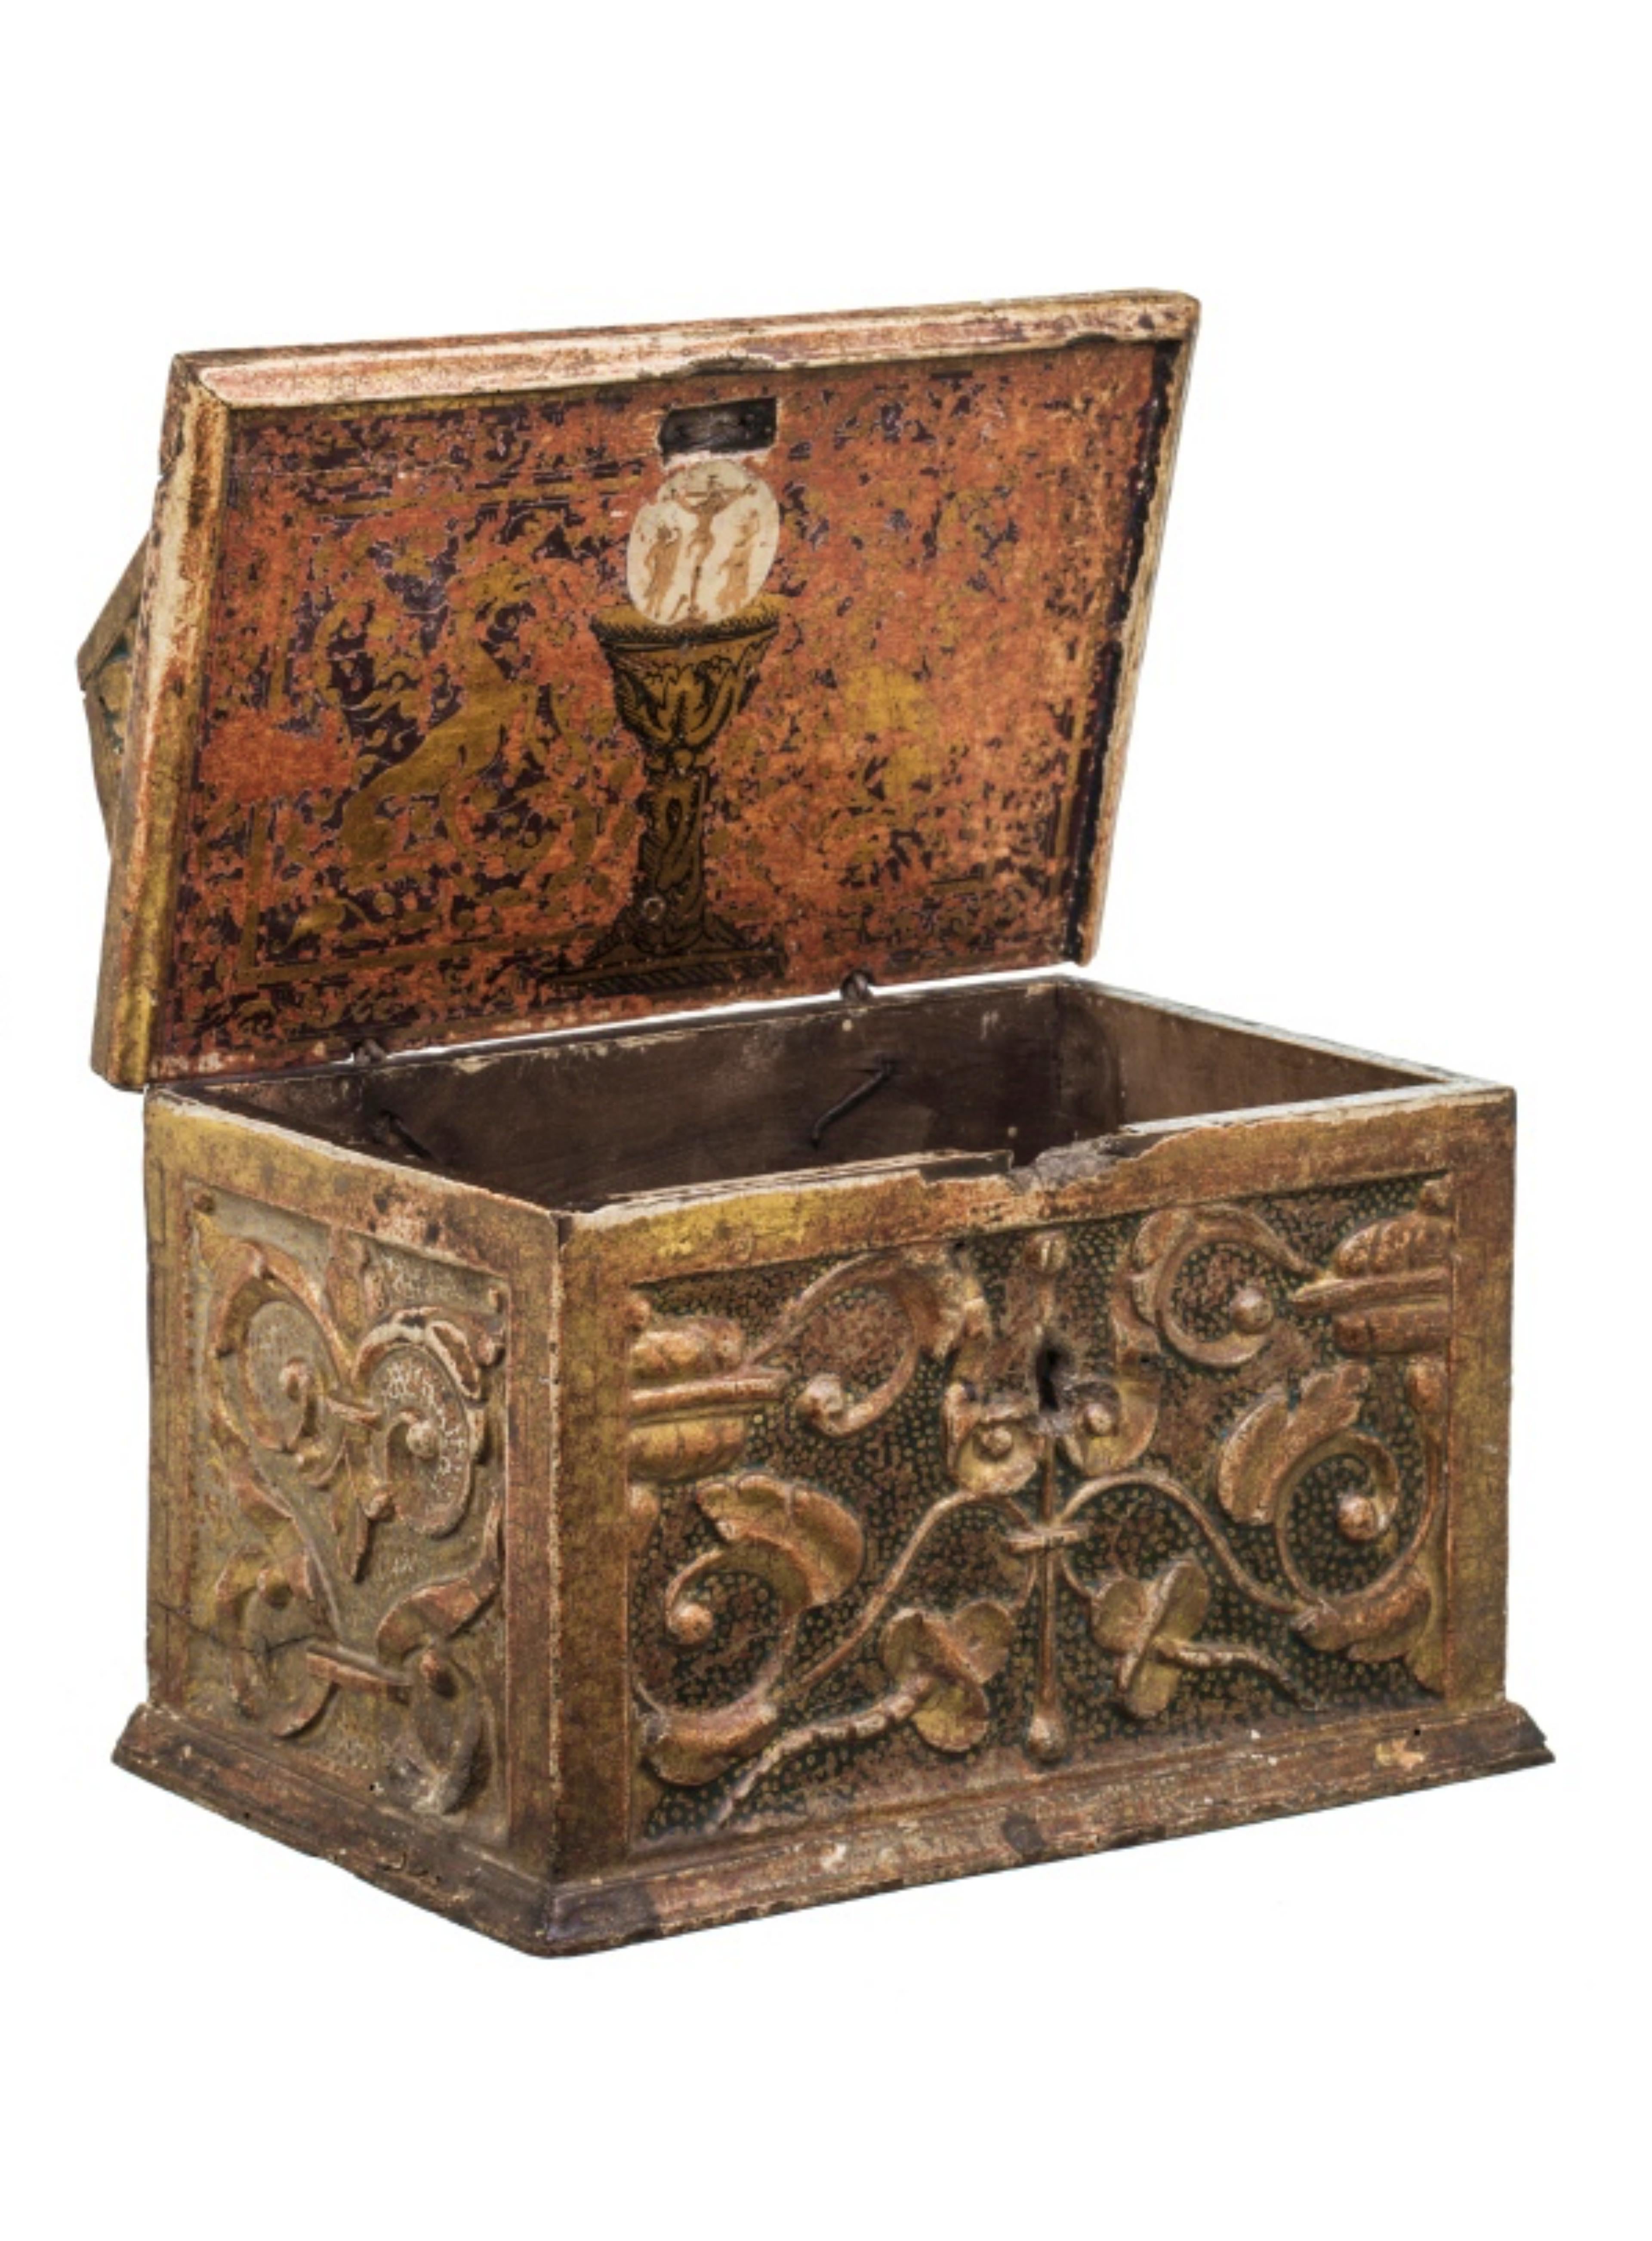 Important Spanish safe box
14th-15th century.
Lacquered wood
with parallelepiped shape with triangular section roof-shaped lid, decorated with vegetal windings.
Interior decorated with two stylized and affronted animals inside a frame and in the